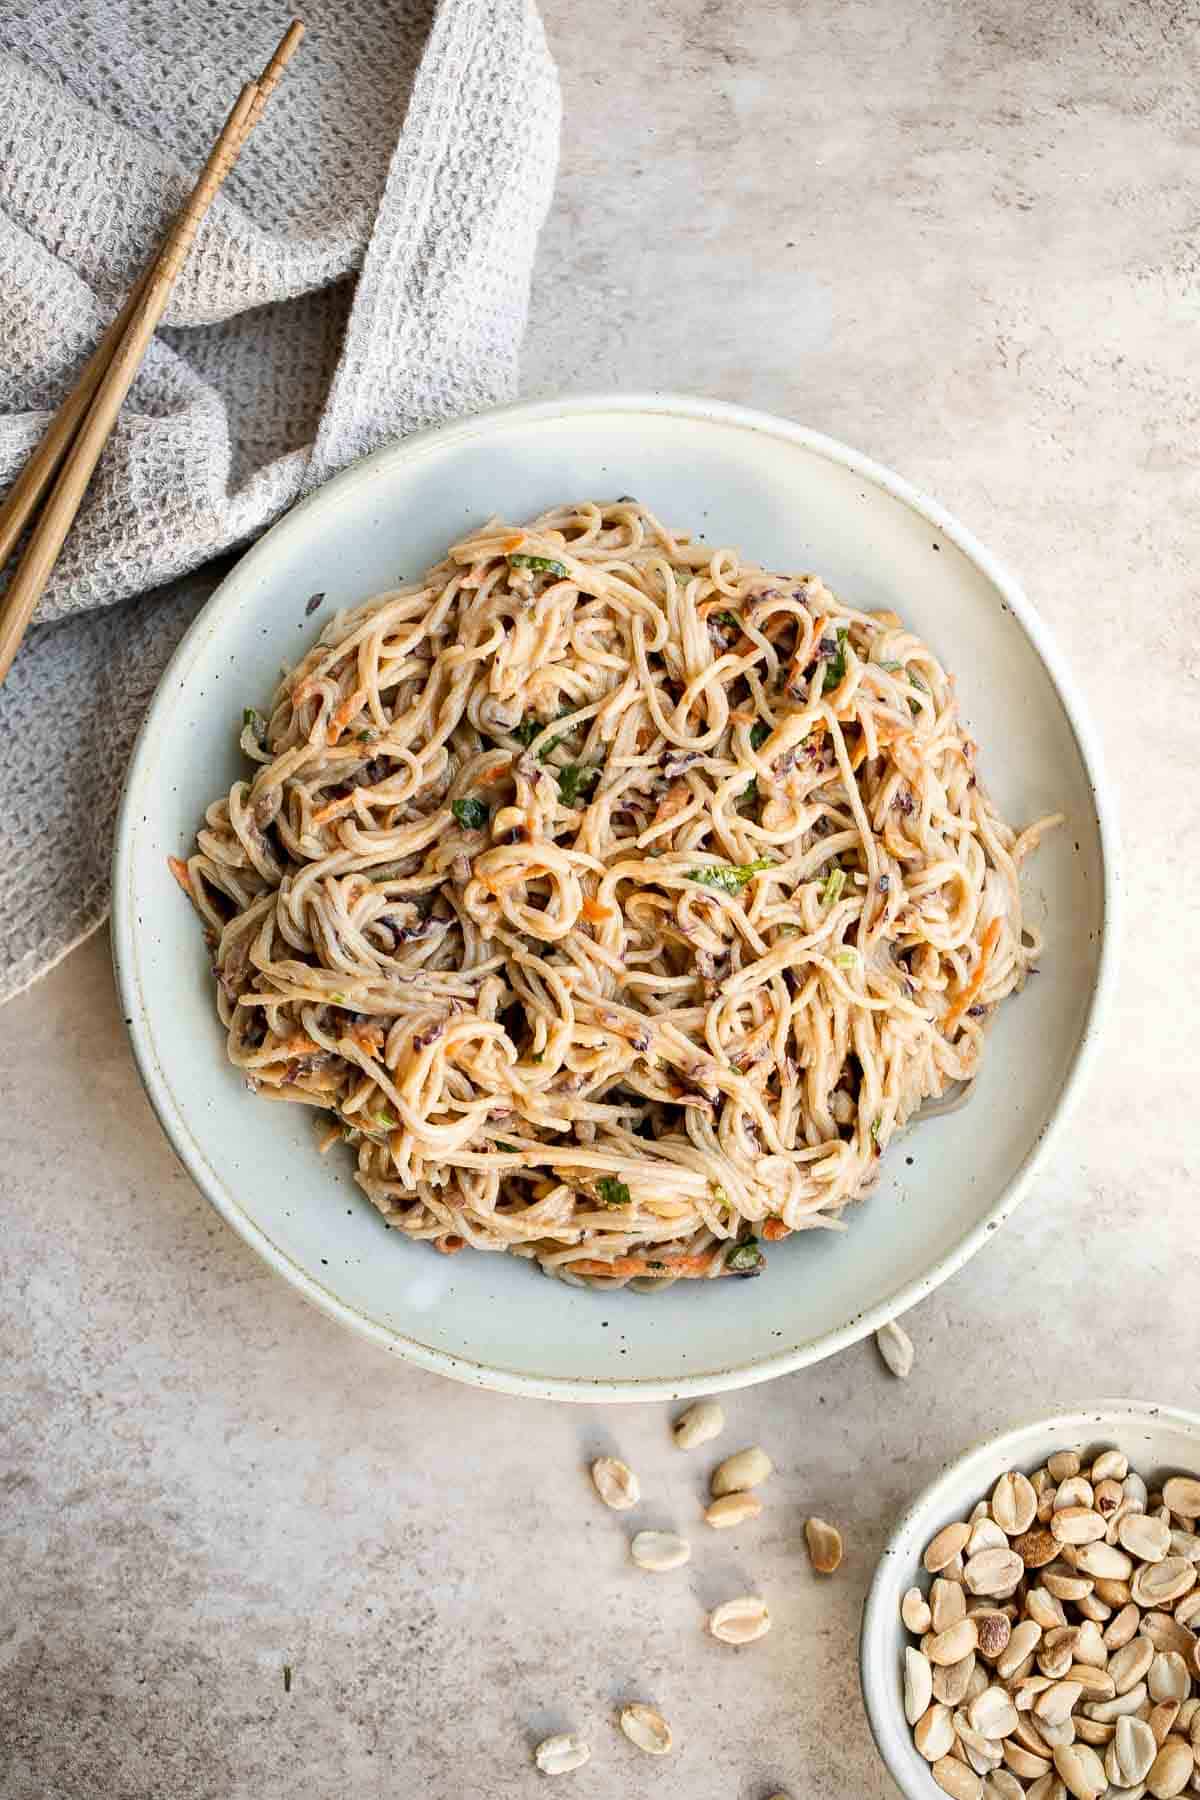 Peanut noodles are creamy, nutty, and delicious. This quick and easy, vegan homemade takeout recipe is loaded with flavor and is ready in 15 minutes. | aheadofthyme.com